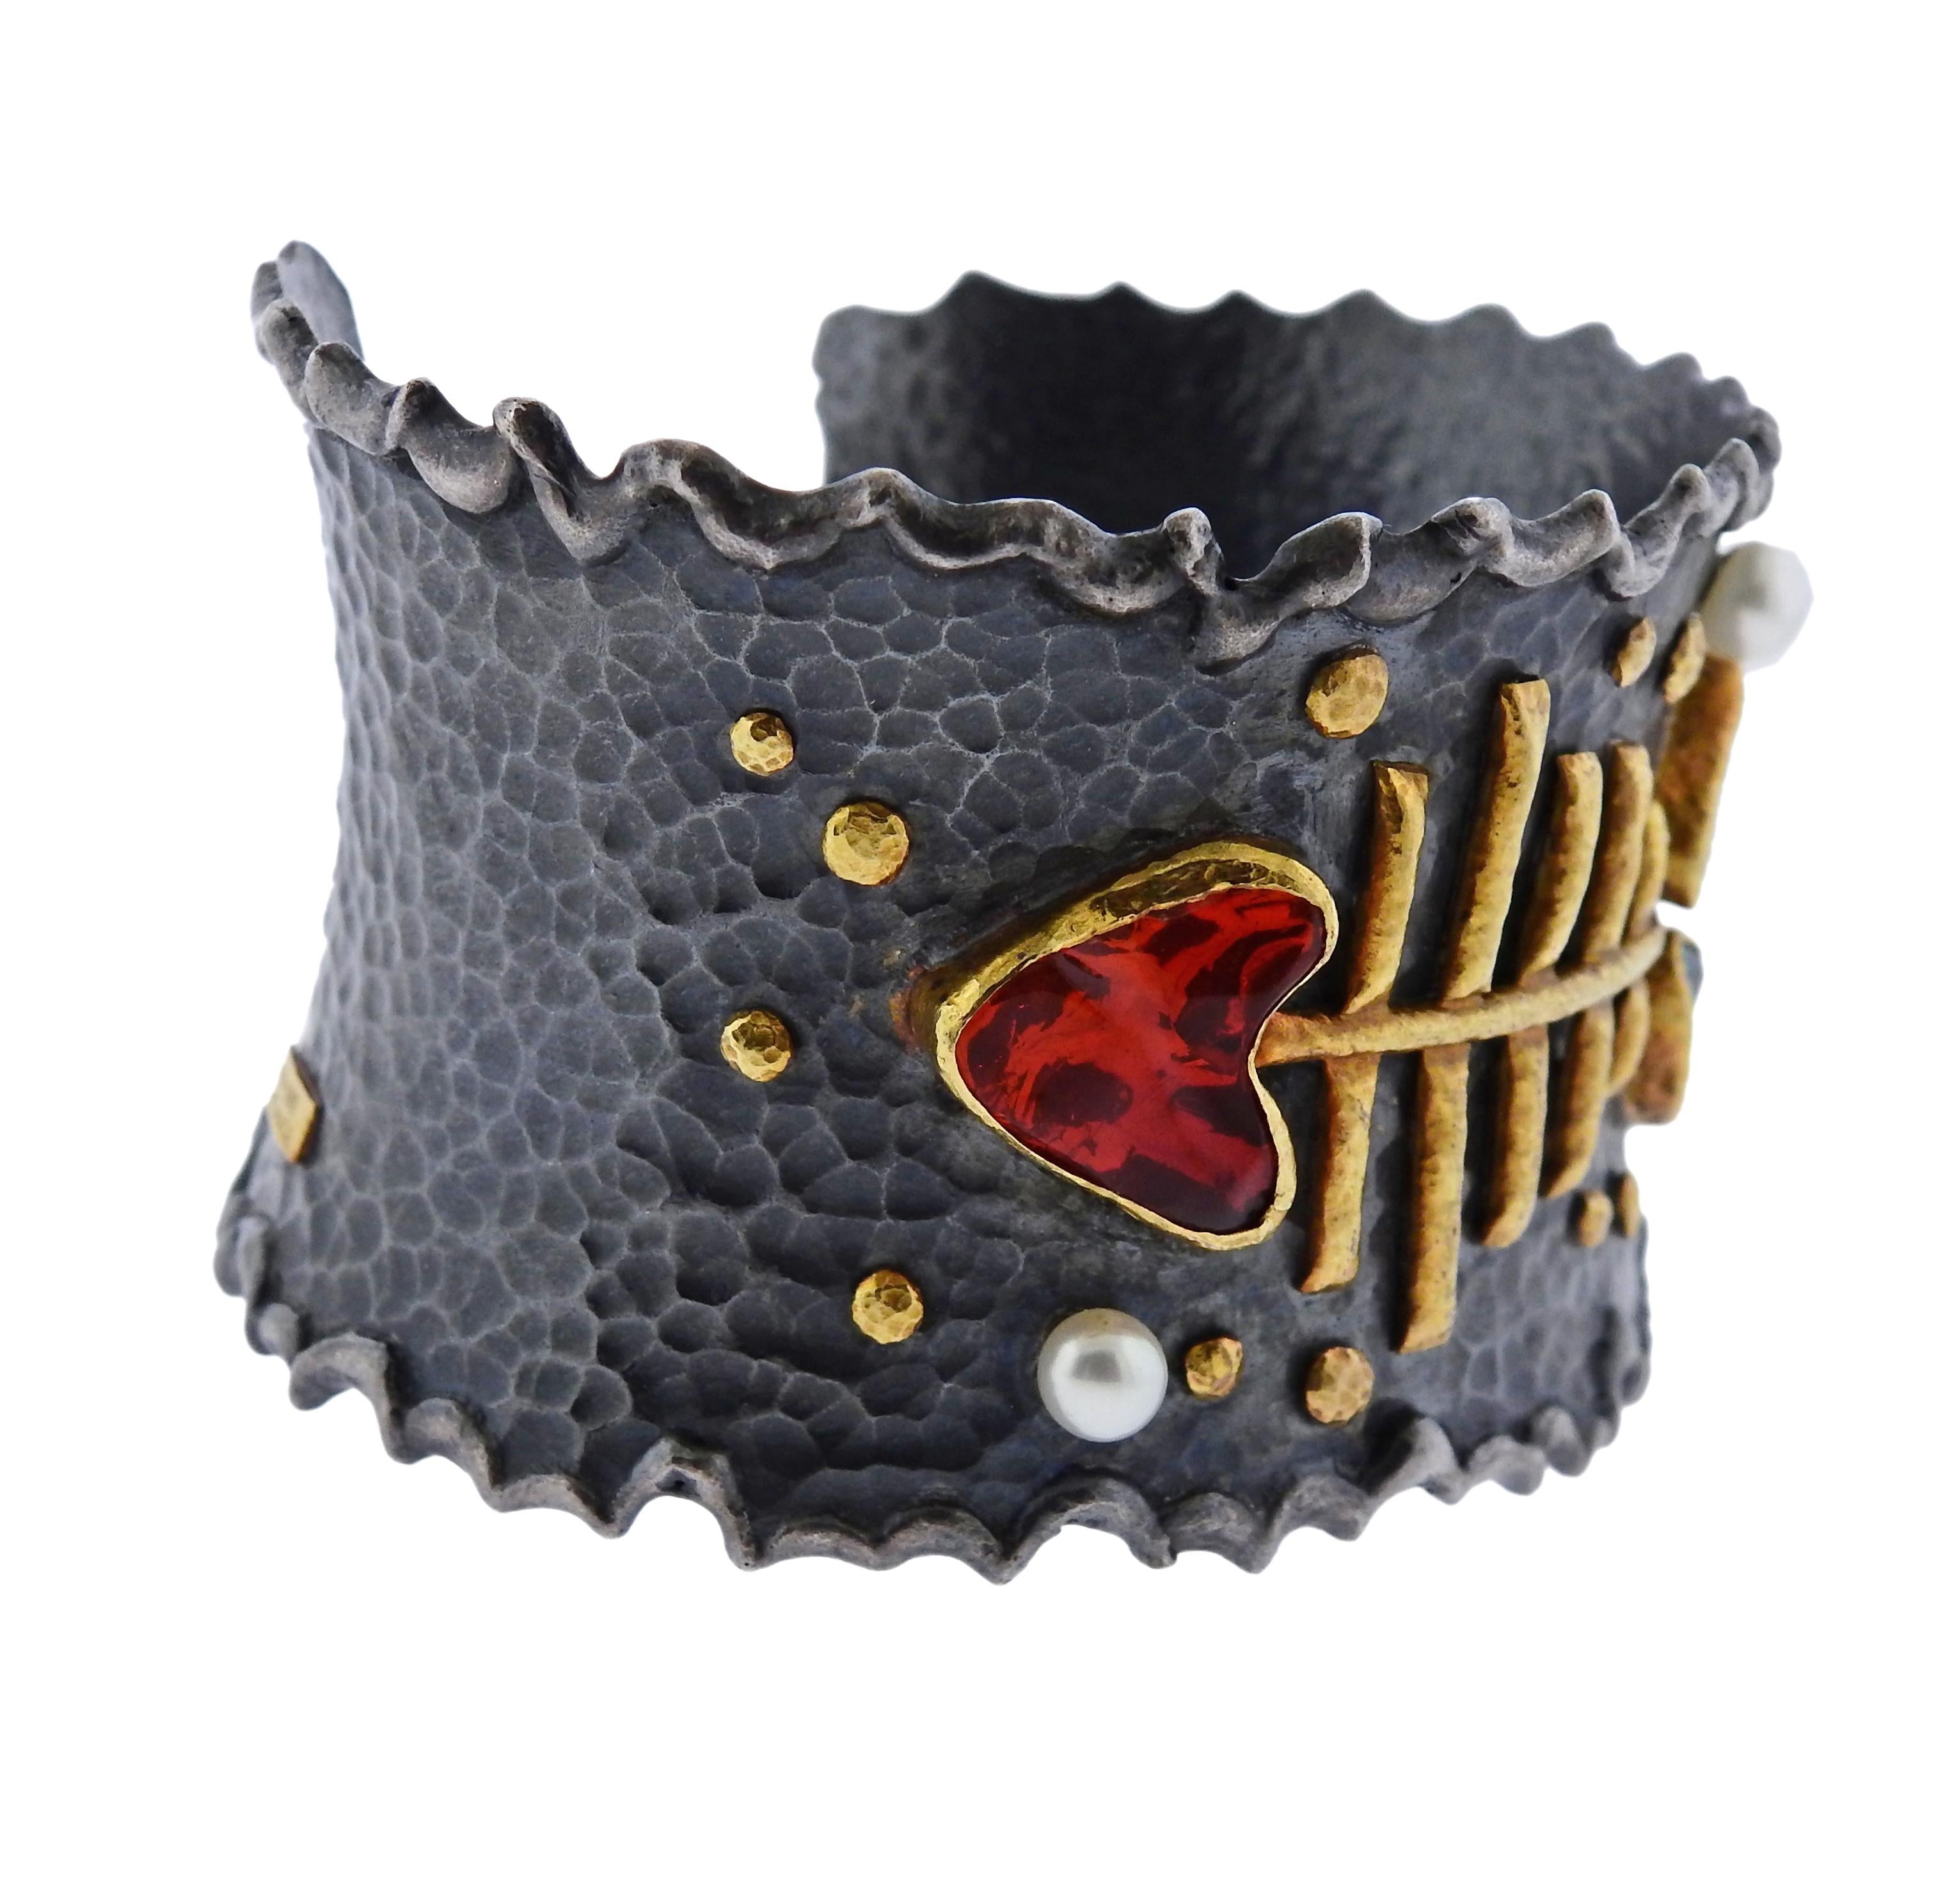 24k gold and oxidized silver wide cuff bracelet, crafted by Ara, featuring fish bone, decorated with Pearls, Jelly Opal, Boulder Opals.  Bracelet will fit approx. up to 7.5